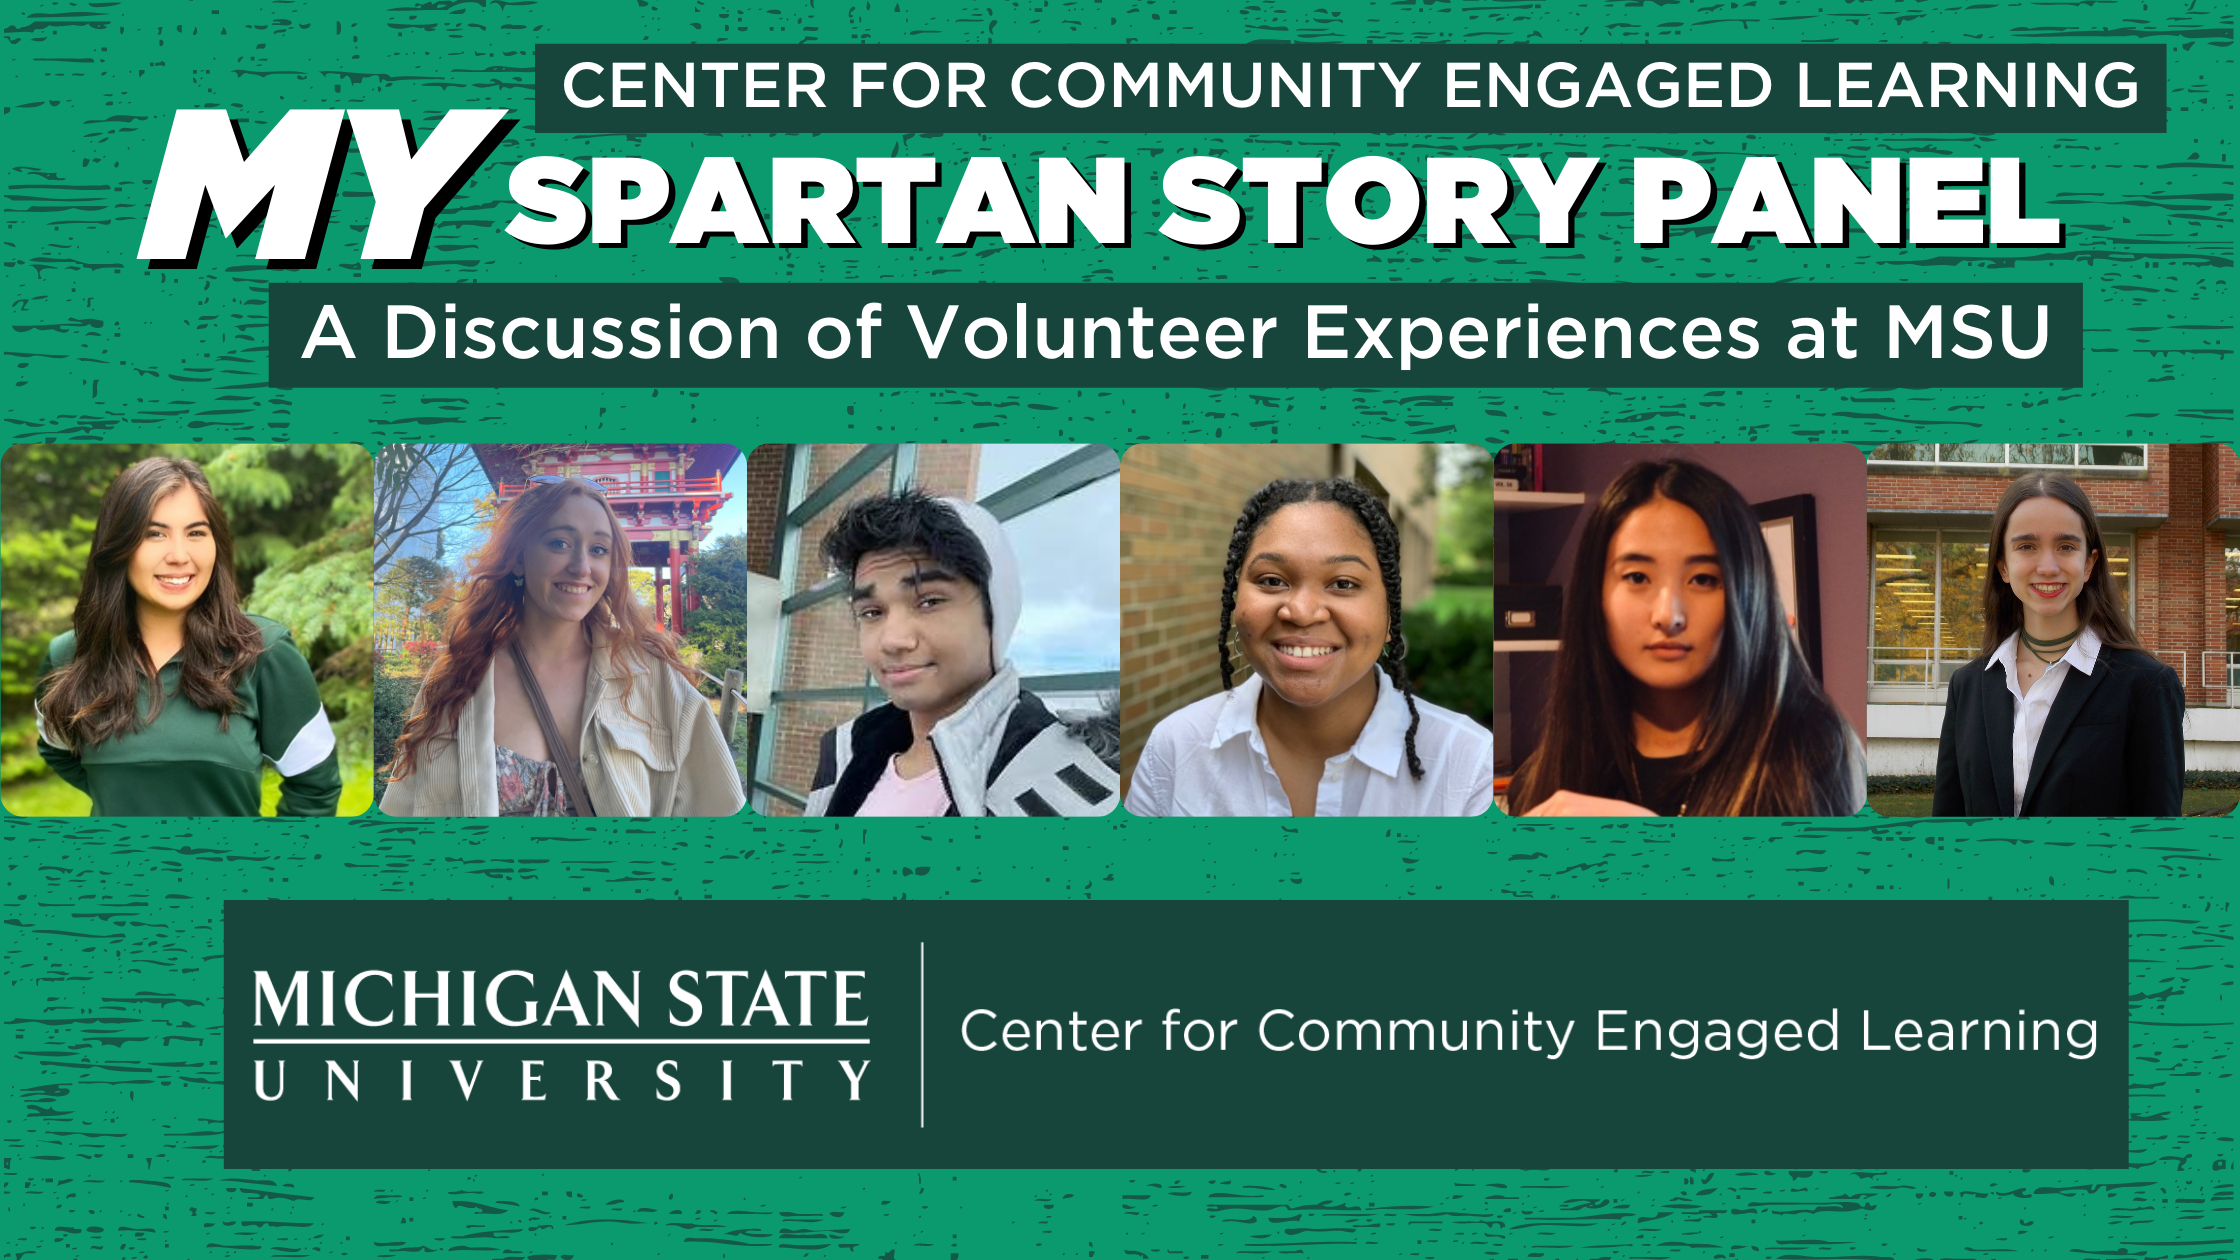 Text: Center for Community Engaged Learning MY Spartan Story Panel: A Discussion of Student Volunteer Experiences Images: Photos of 6 Student Panelists